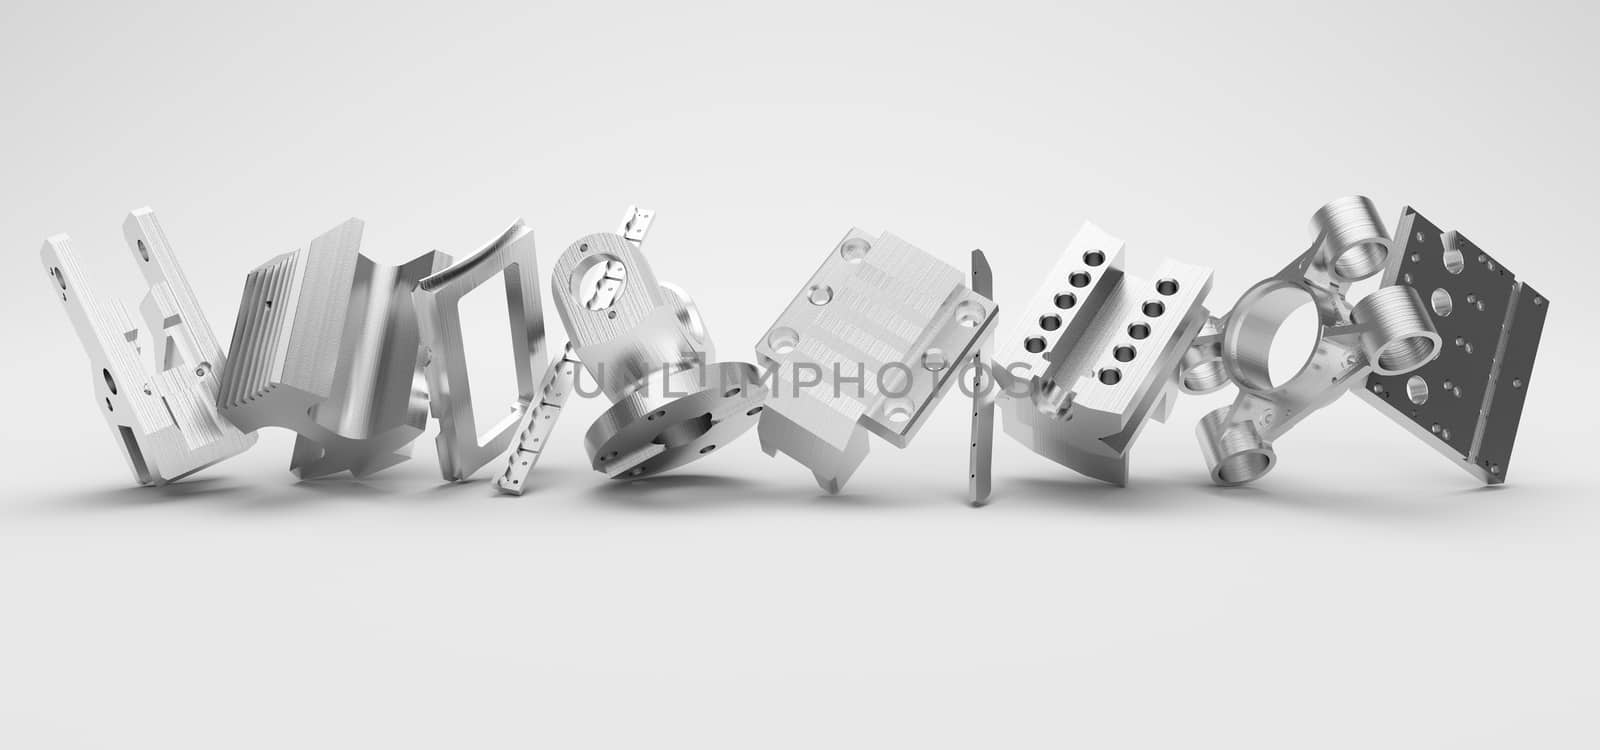 metal parts standing in row on white background by xtate